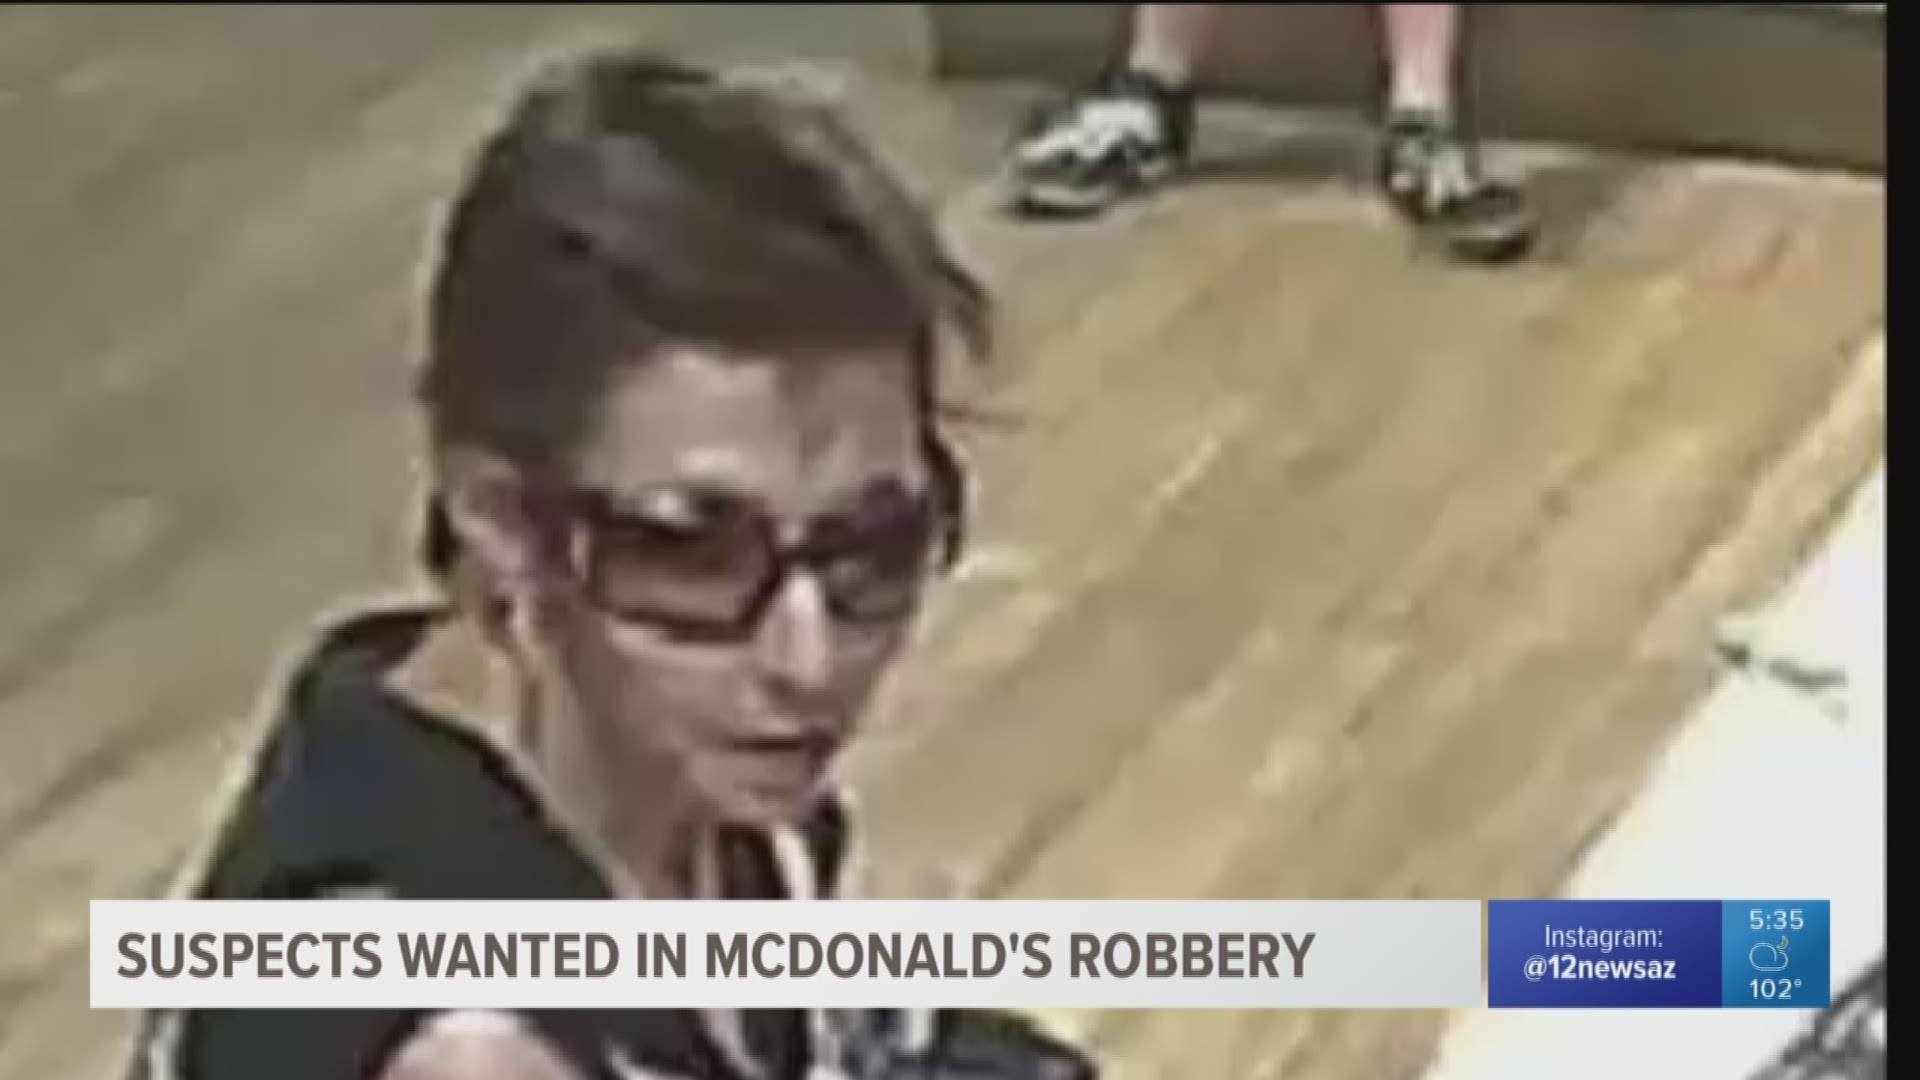 Phoenix Police are asking the public to help find two robbery suspects who targeted a couple of fast food restaurants in Phoenix.